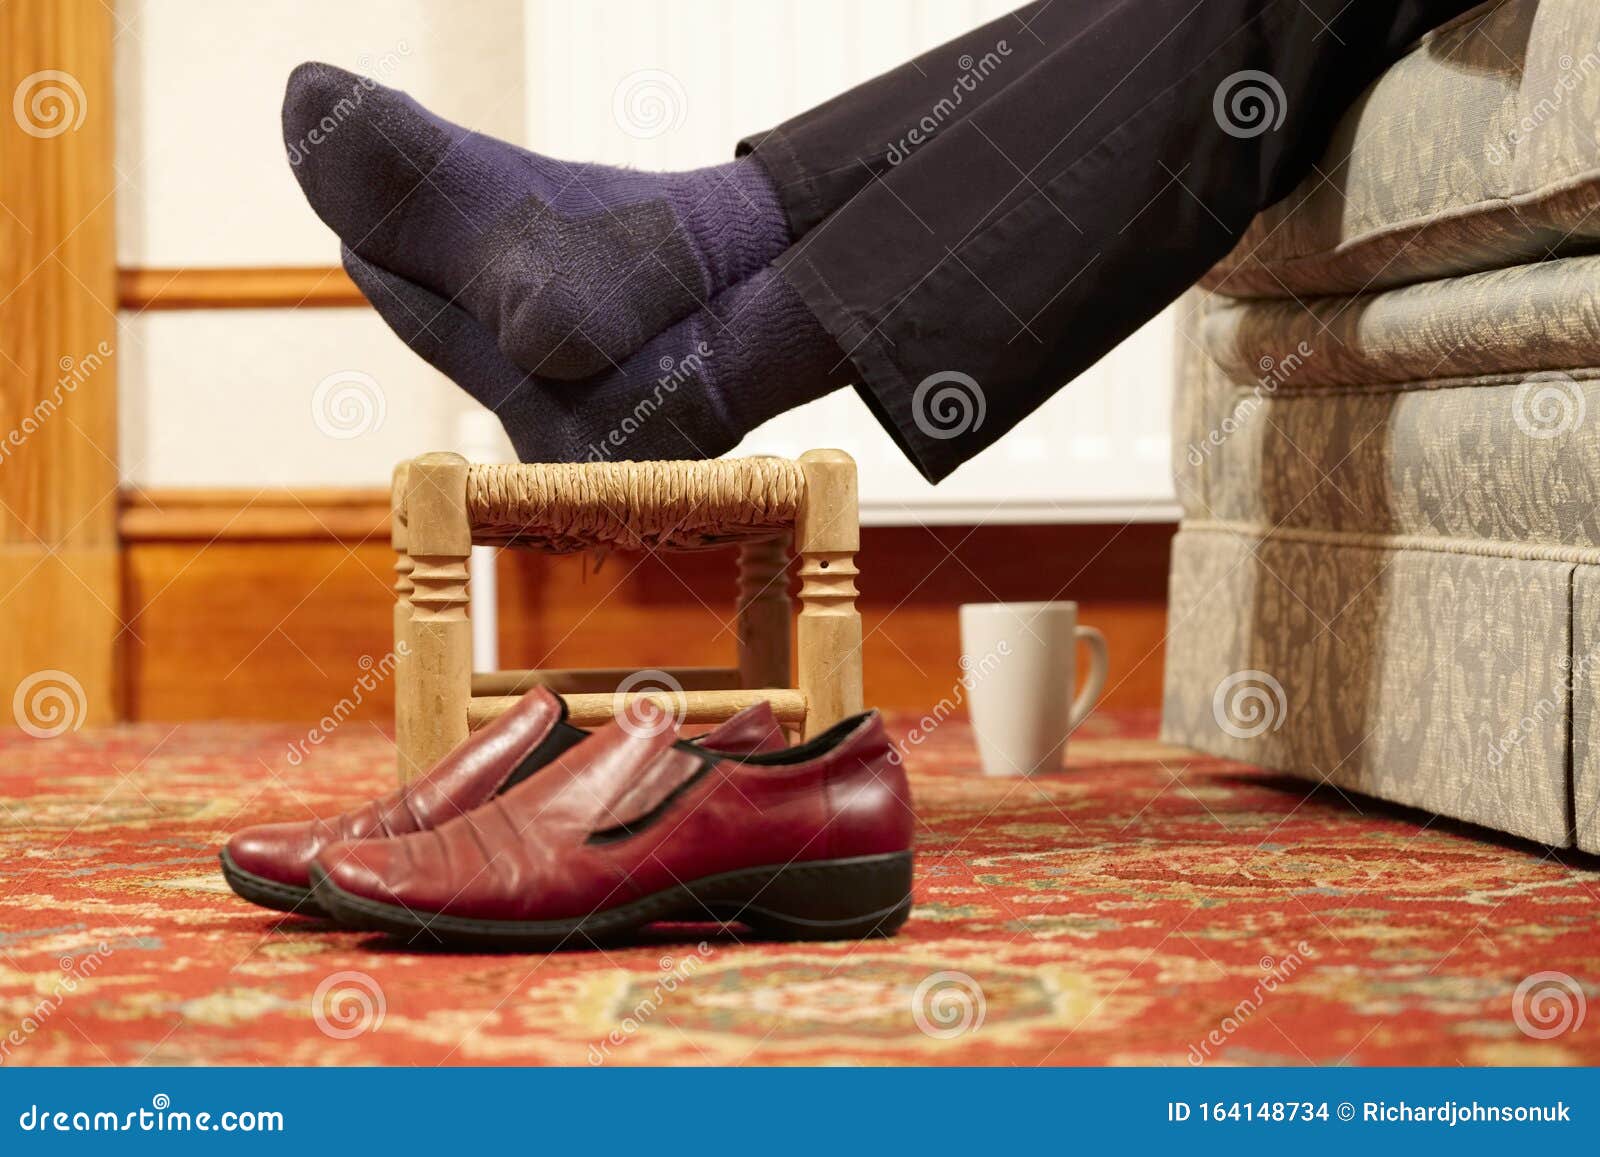 Feet Resting On Foot Stool No Shoes With Cup Of Hot Drink For